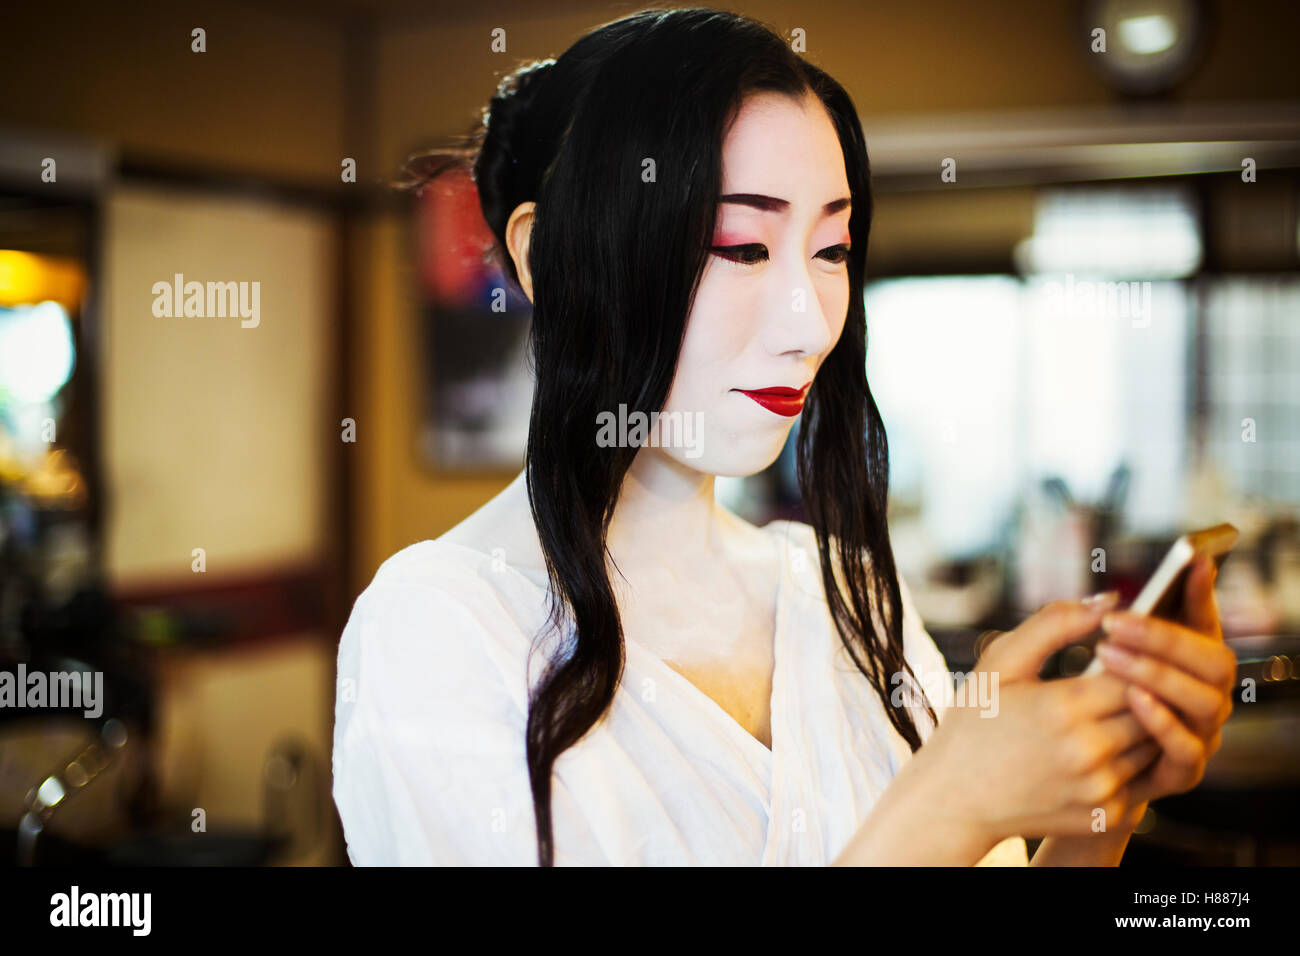 Geisha with long black hair and traditional white face make up  using a smart phone. Stock Photo